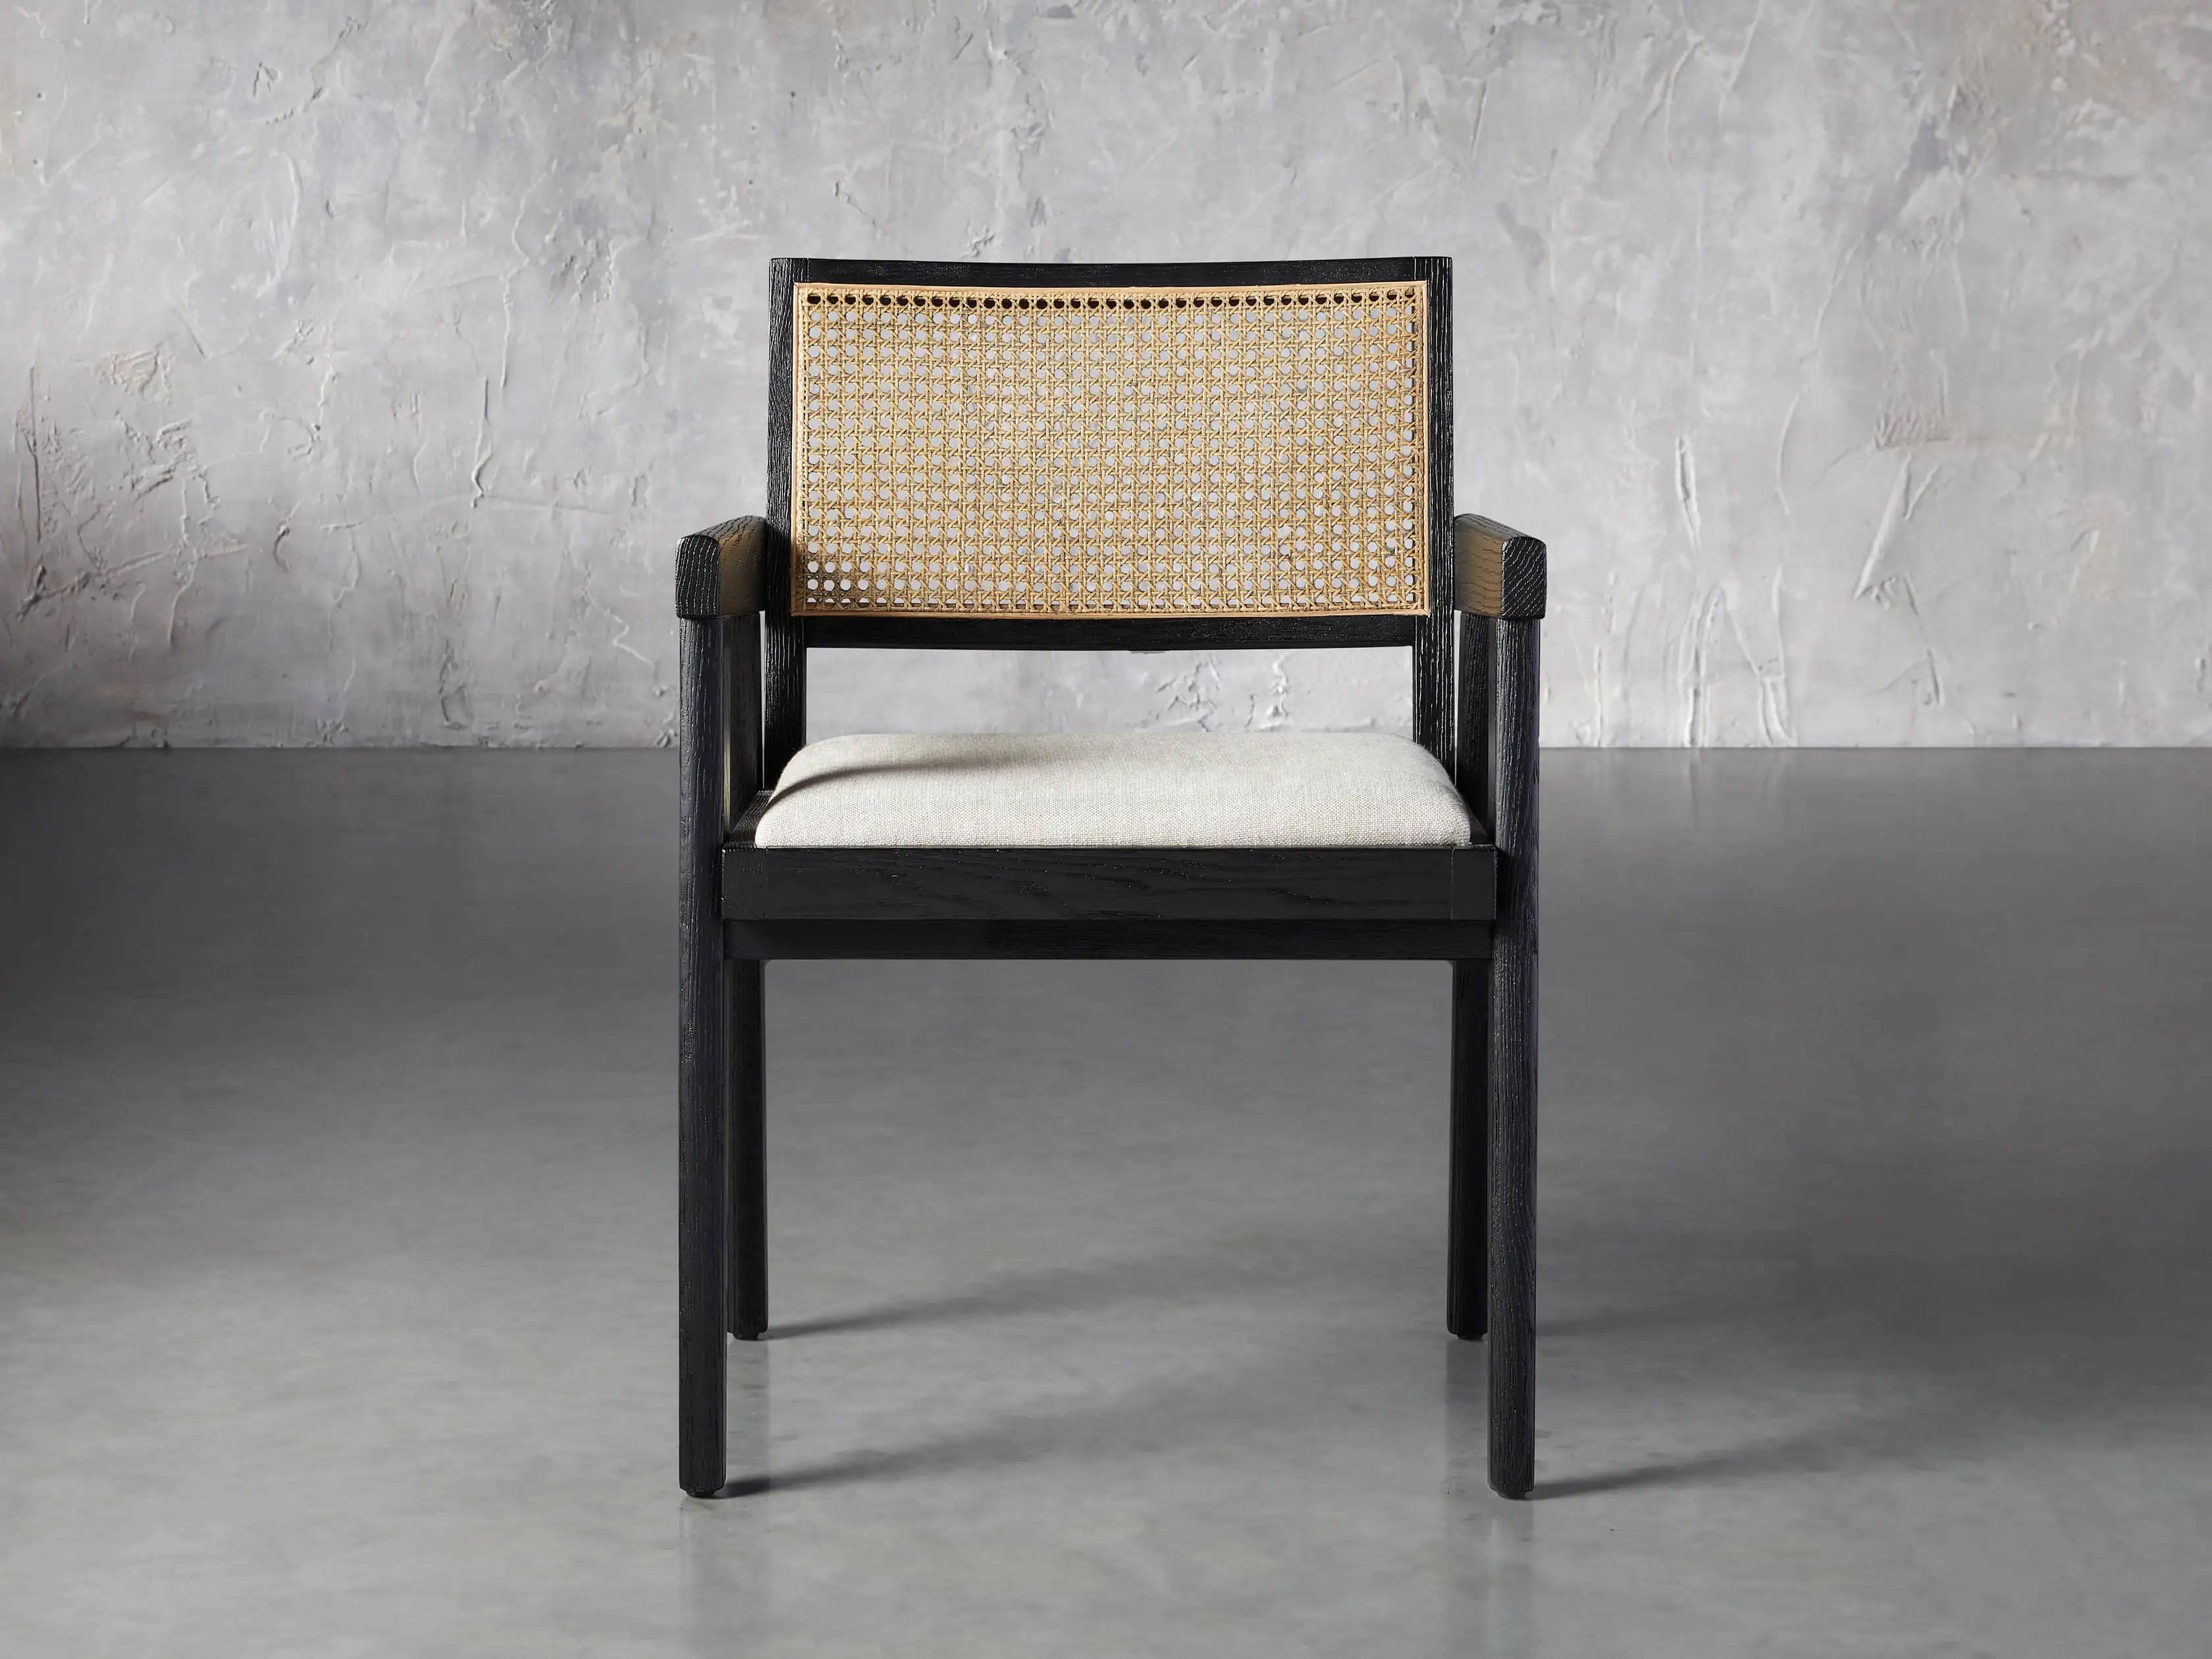 Kroy Cane Back Arm Chair in Black Drifted with Natural Linen seat | Arhaus